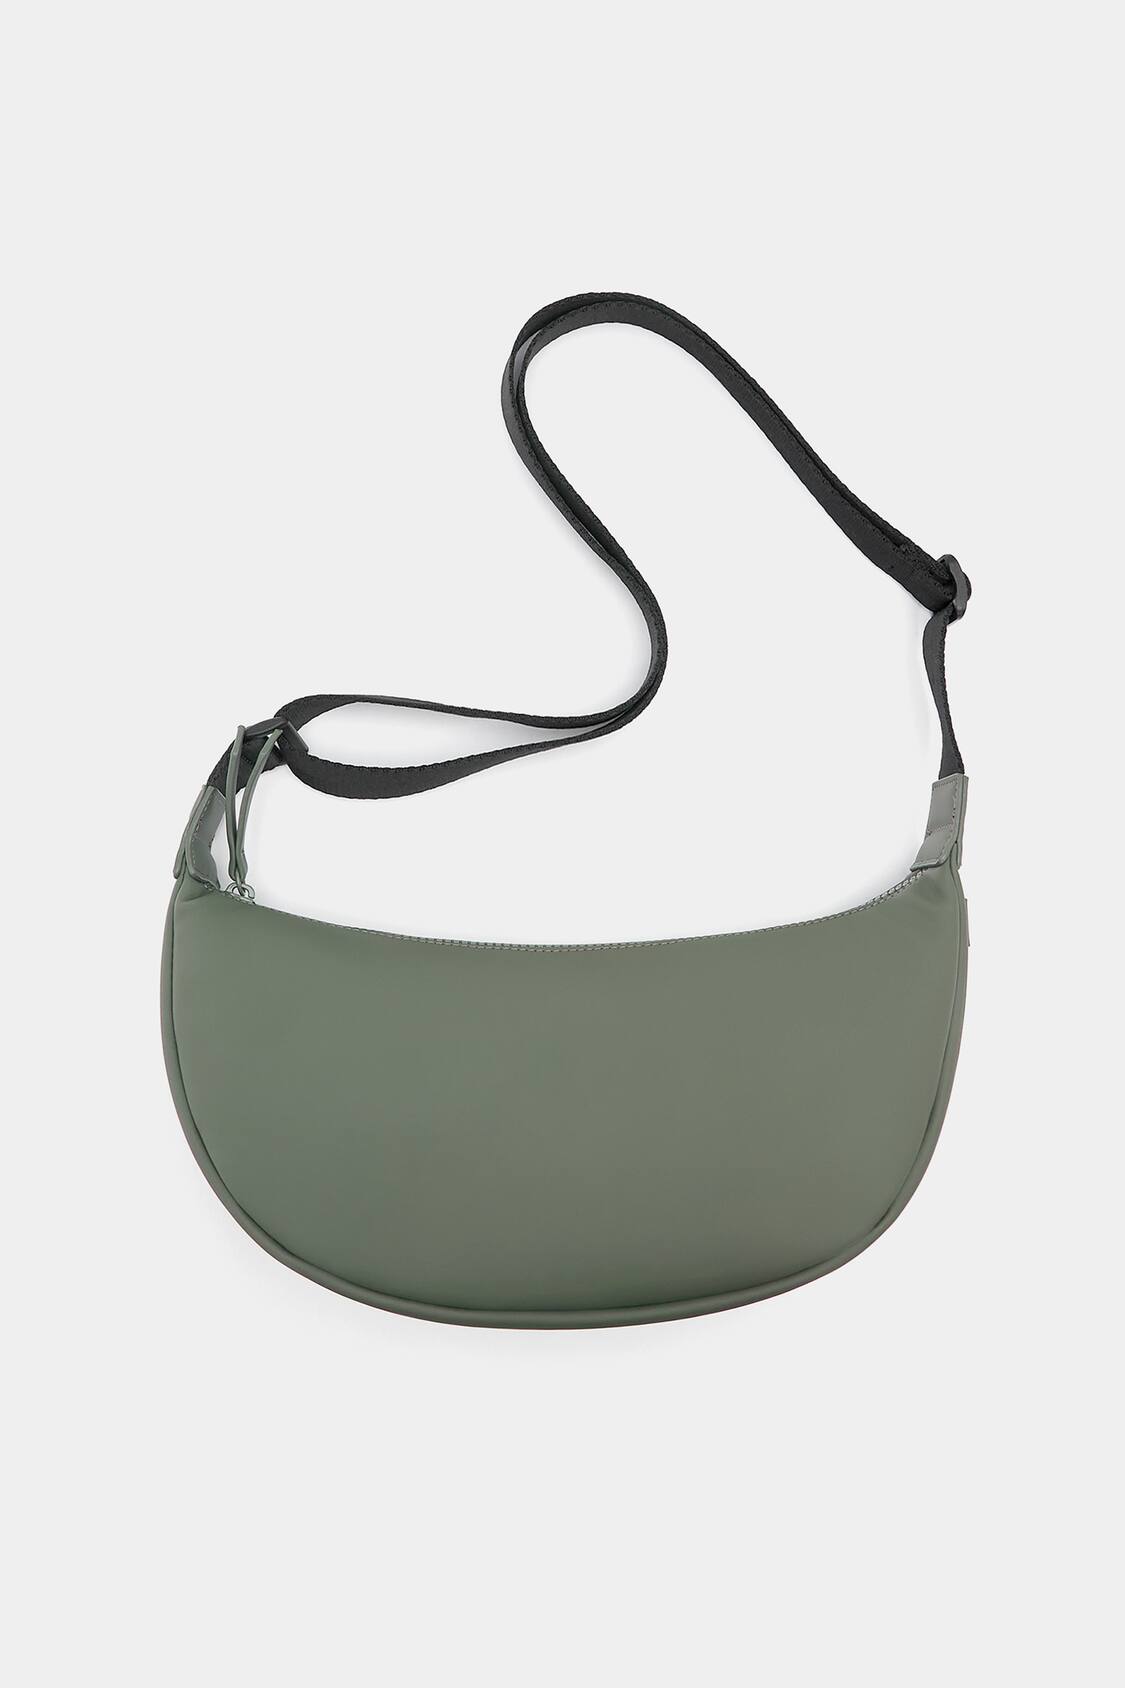 Slouchy Banana Large Leather Crossbody Bag in Black - The Row